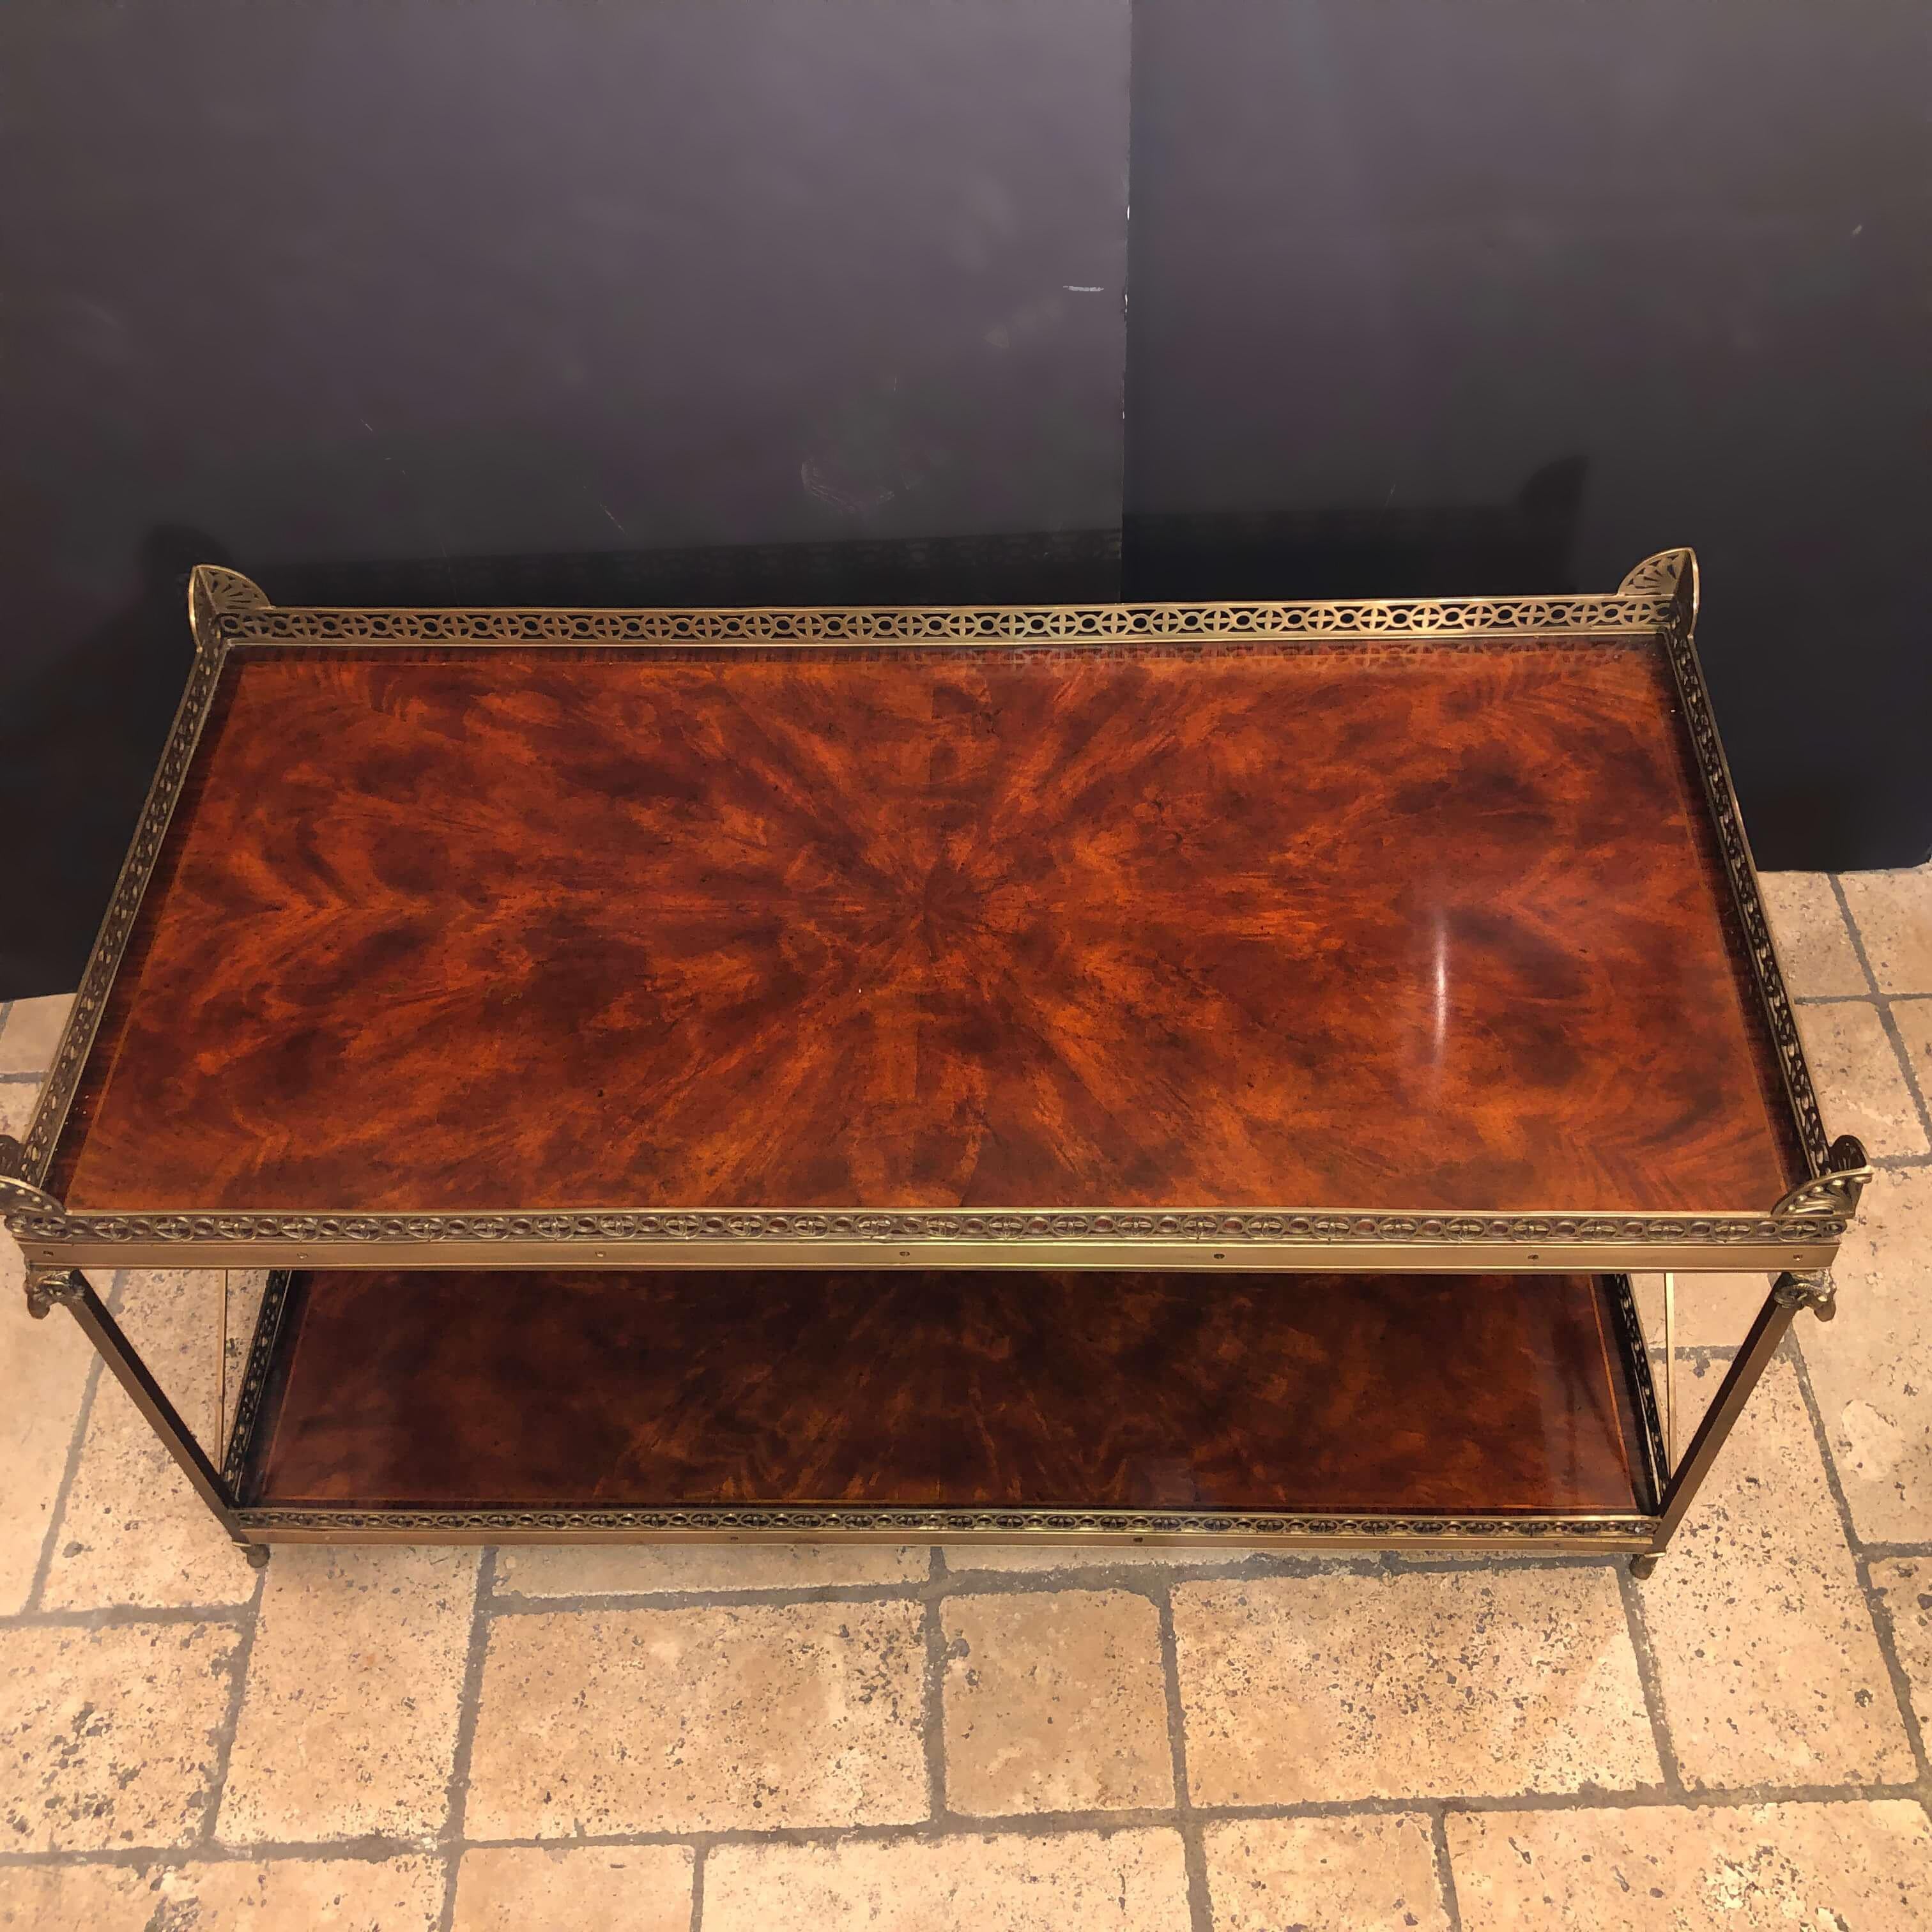 Regency style two-tier mahogany and brass coffee table with Ram's head mounts, X-frame supports, figured mahogany shelves, pierced brass galleries, and palmettes, raised on hoof feet.